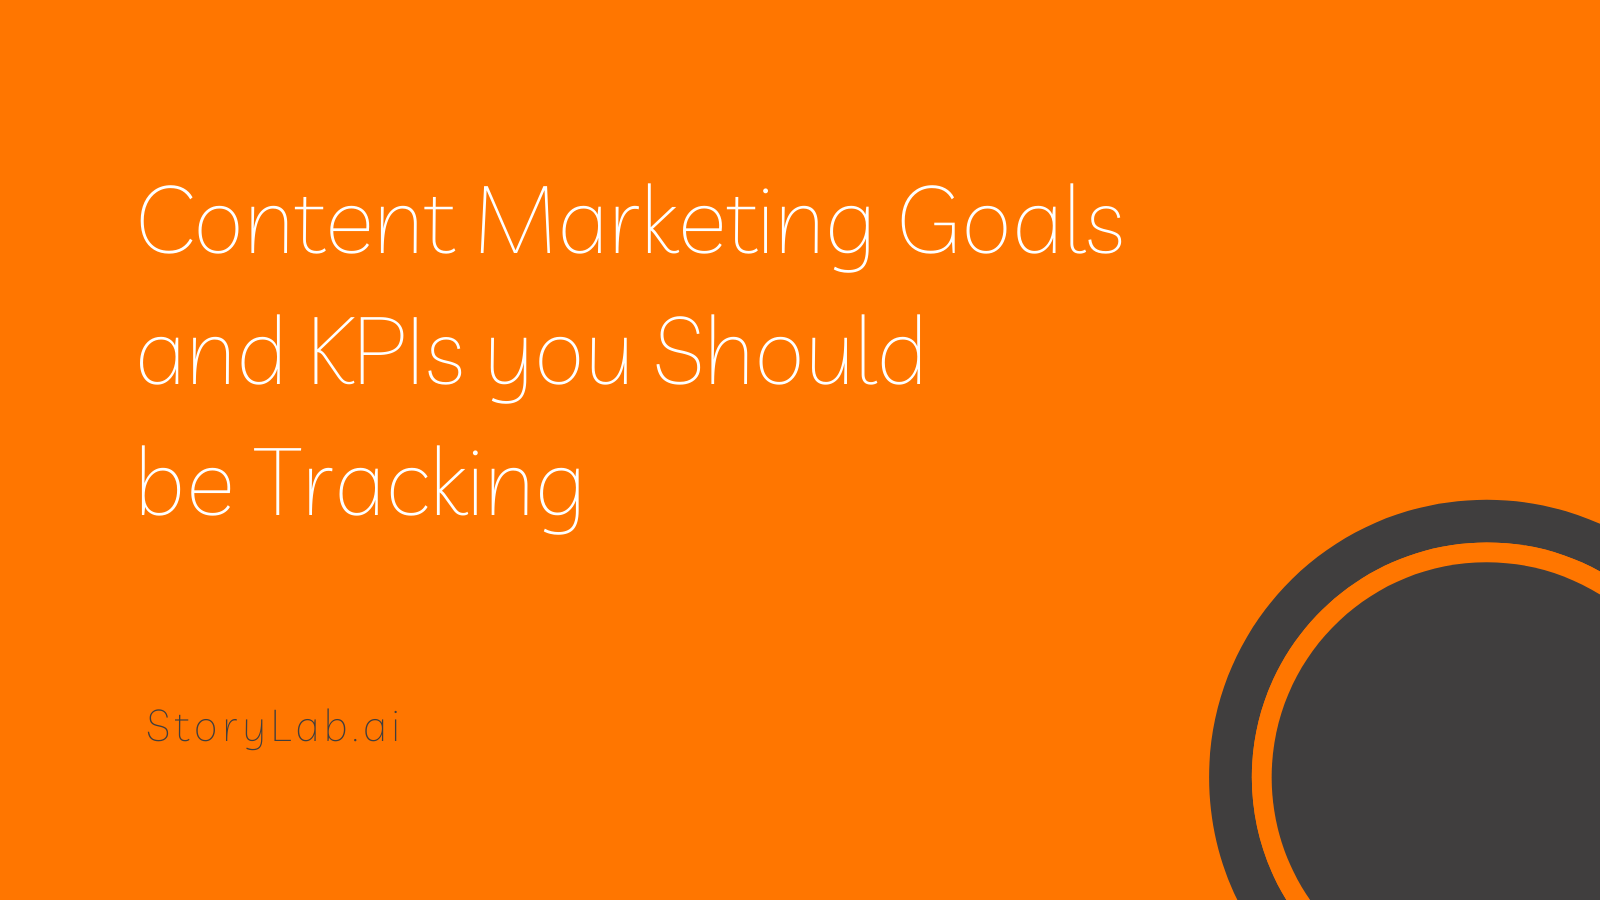 Content Marketing Goals and KPIs you Should be Tracking